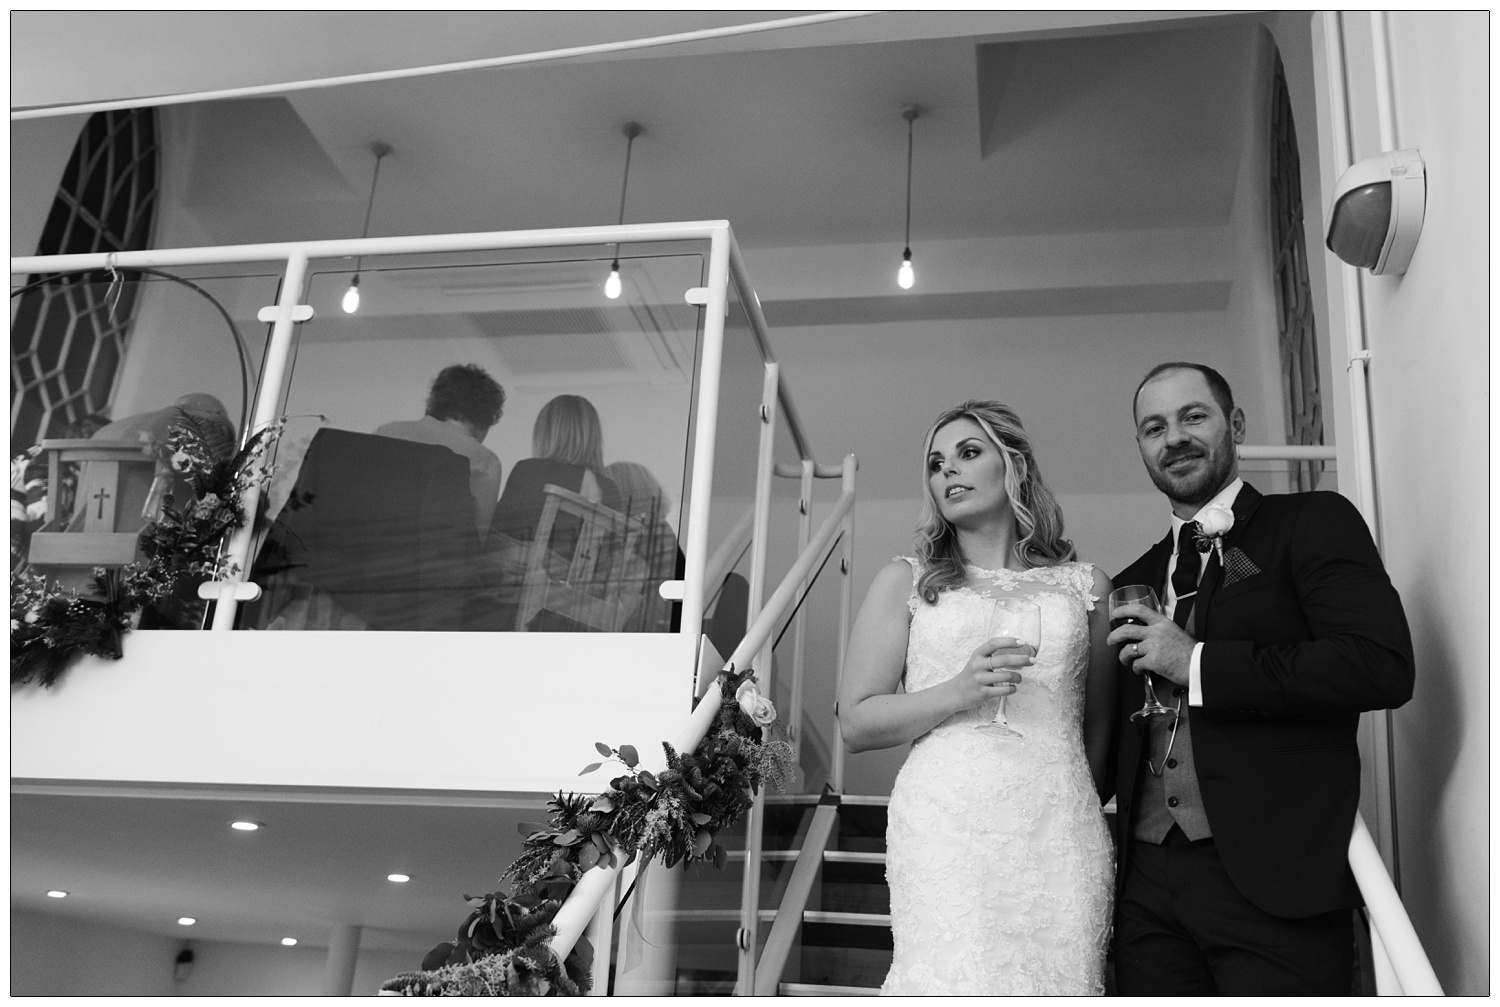 Bride and groom are on the stairs holding wine glasses. Groom is looking at the camera.